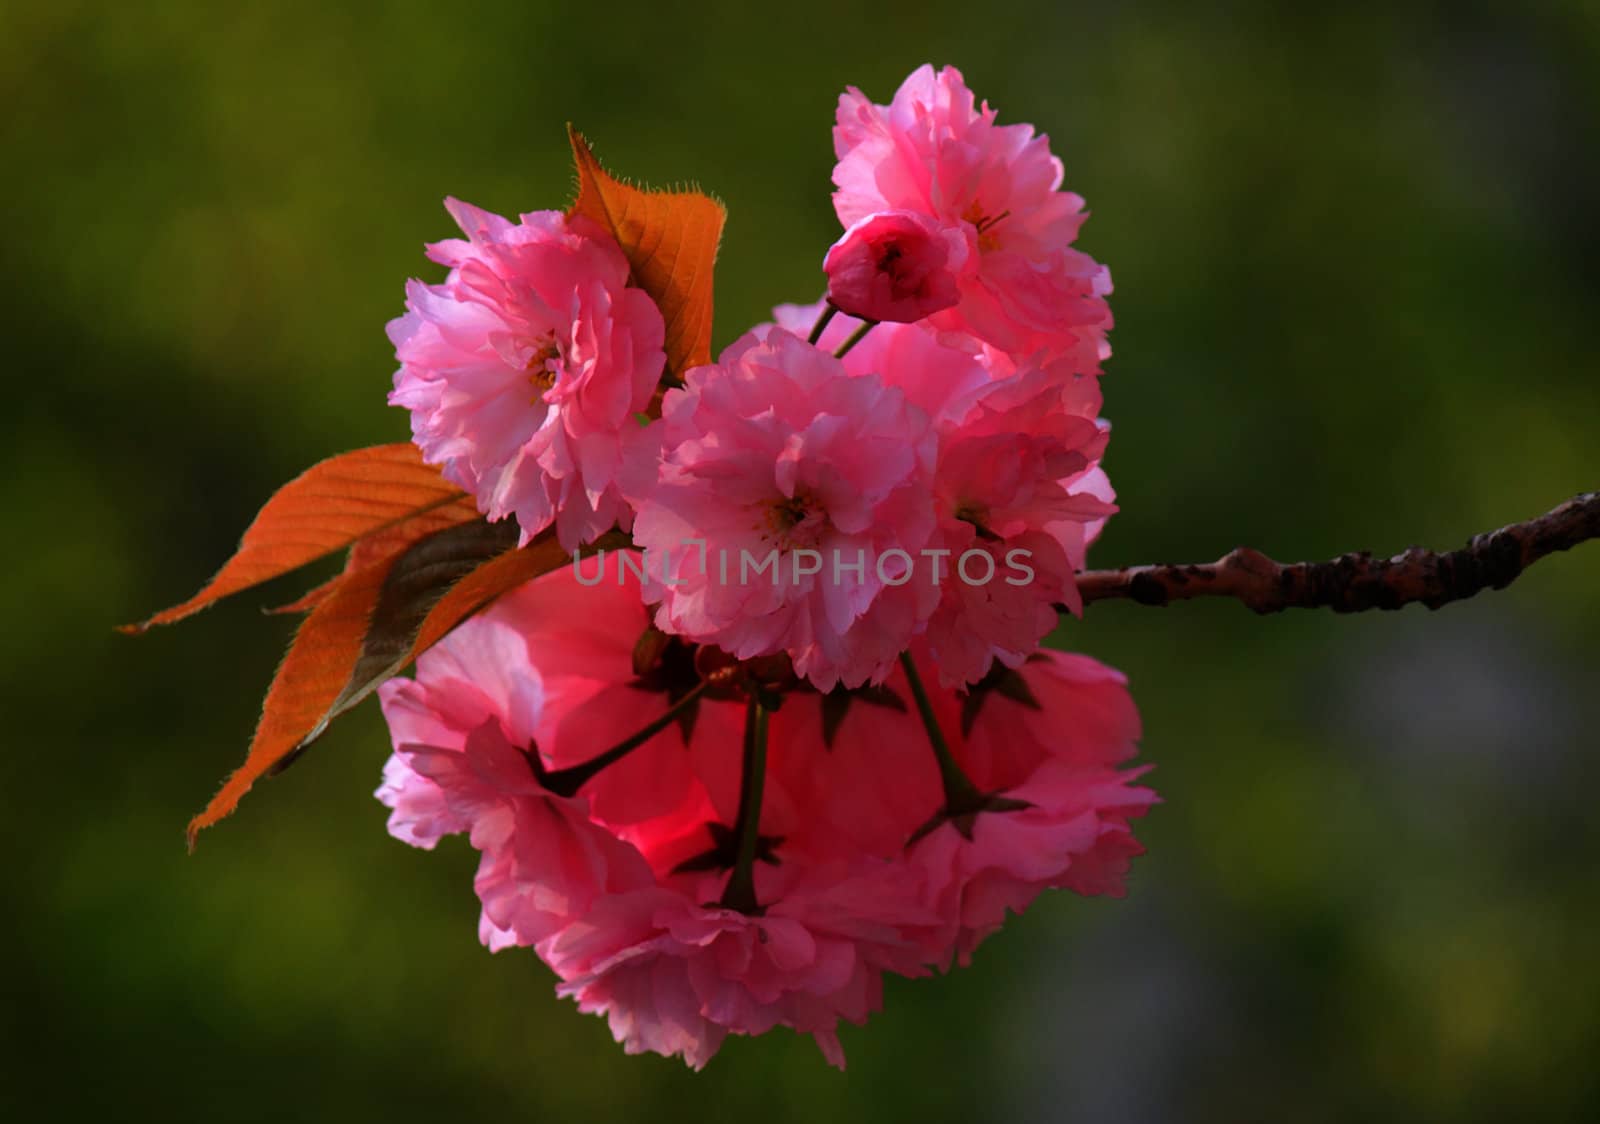 blossoming cherry tree by romantiche